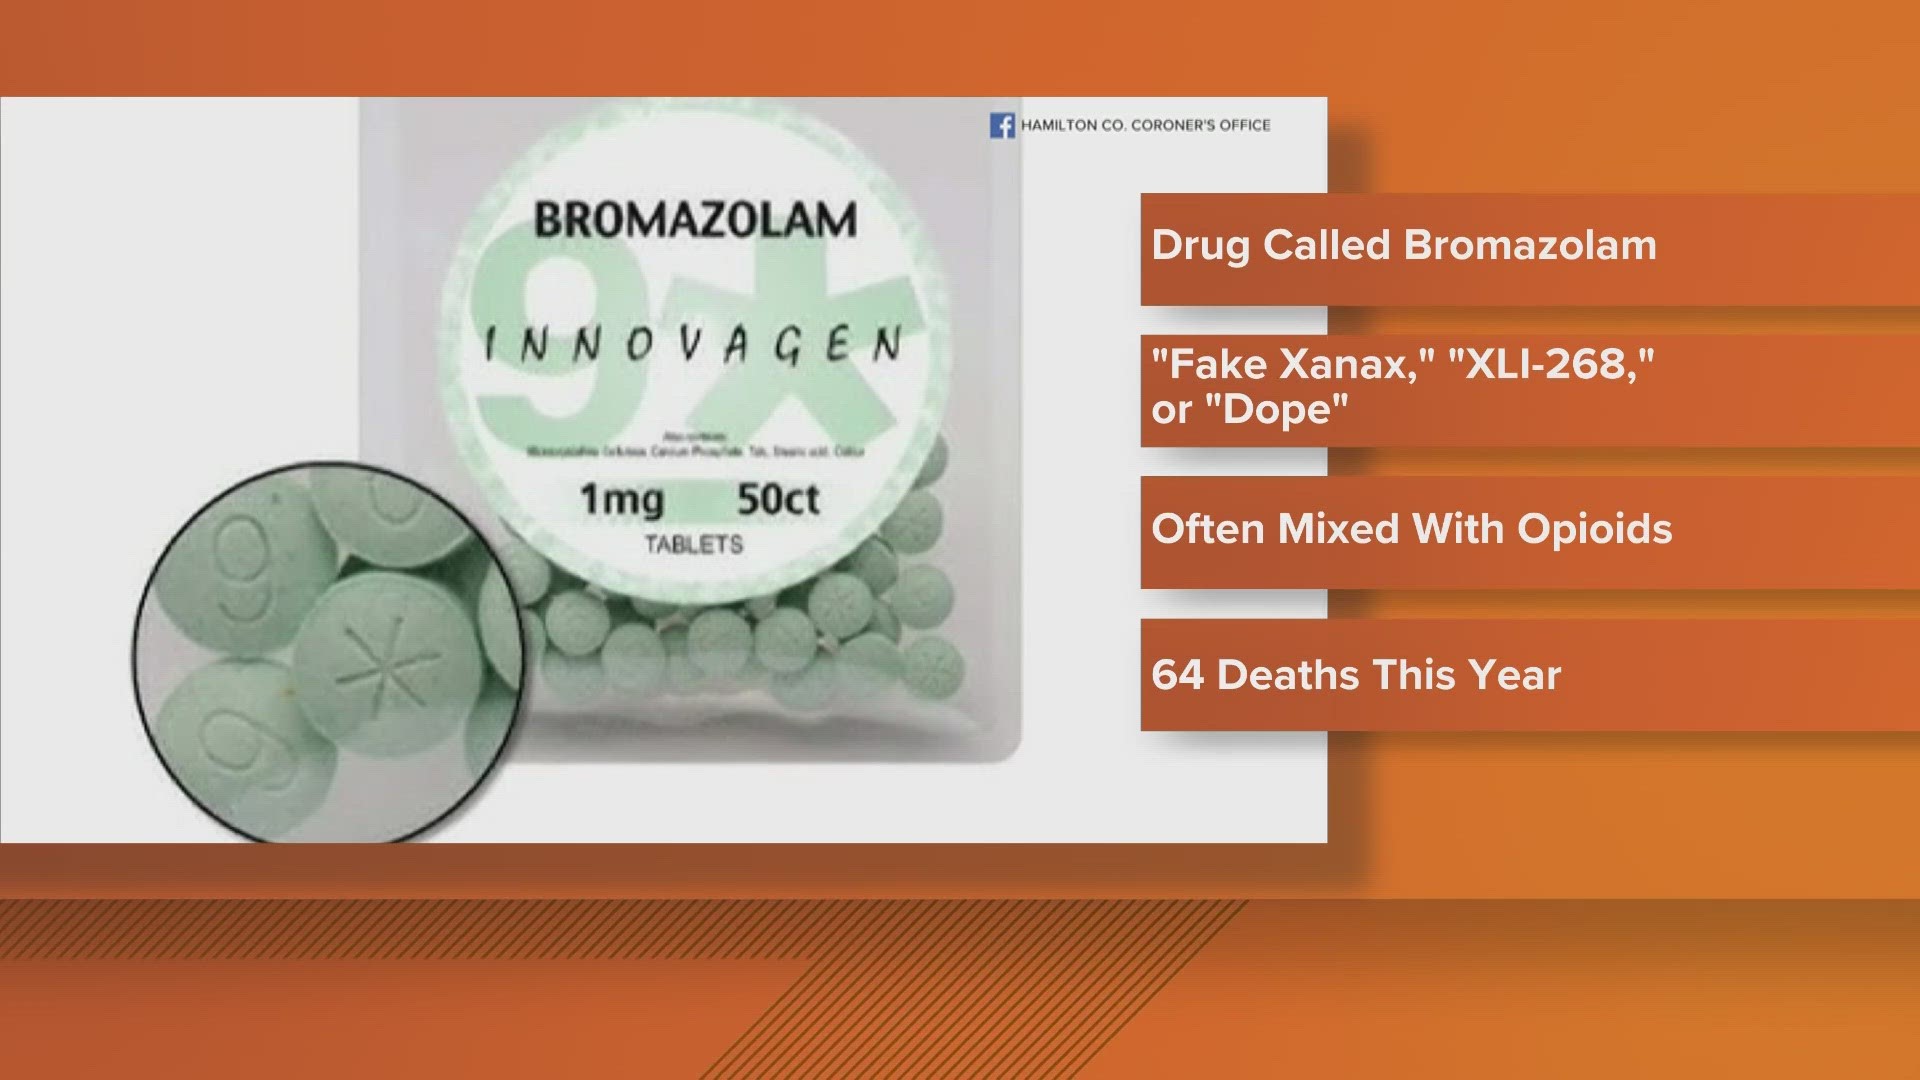 Bromazolam is also known as “XLI-268,” “Xanax,” “Fake Xanax” and “Dope.”